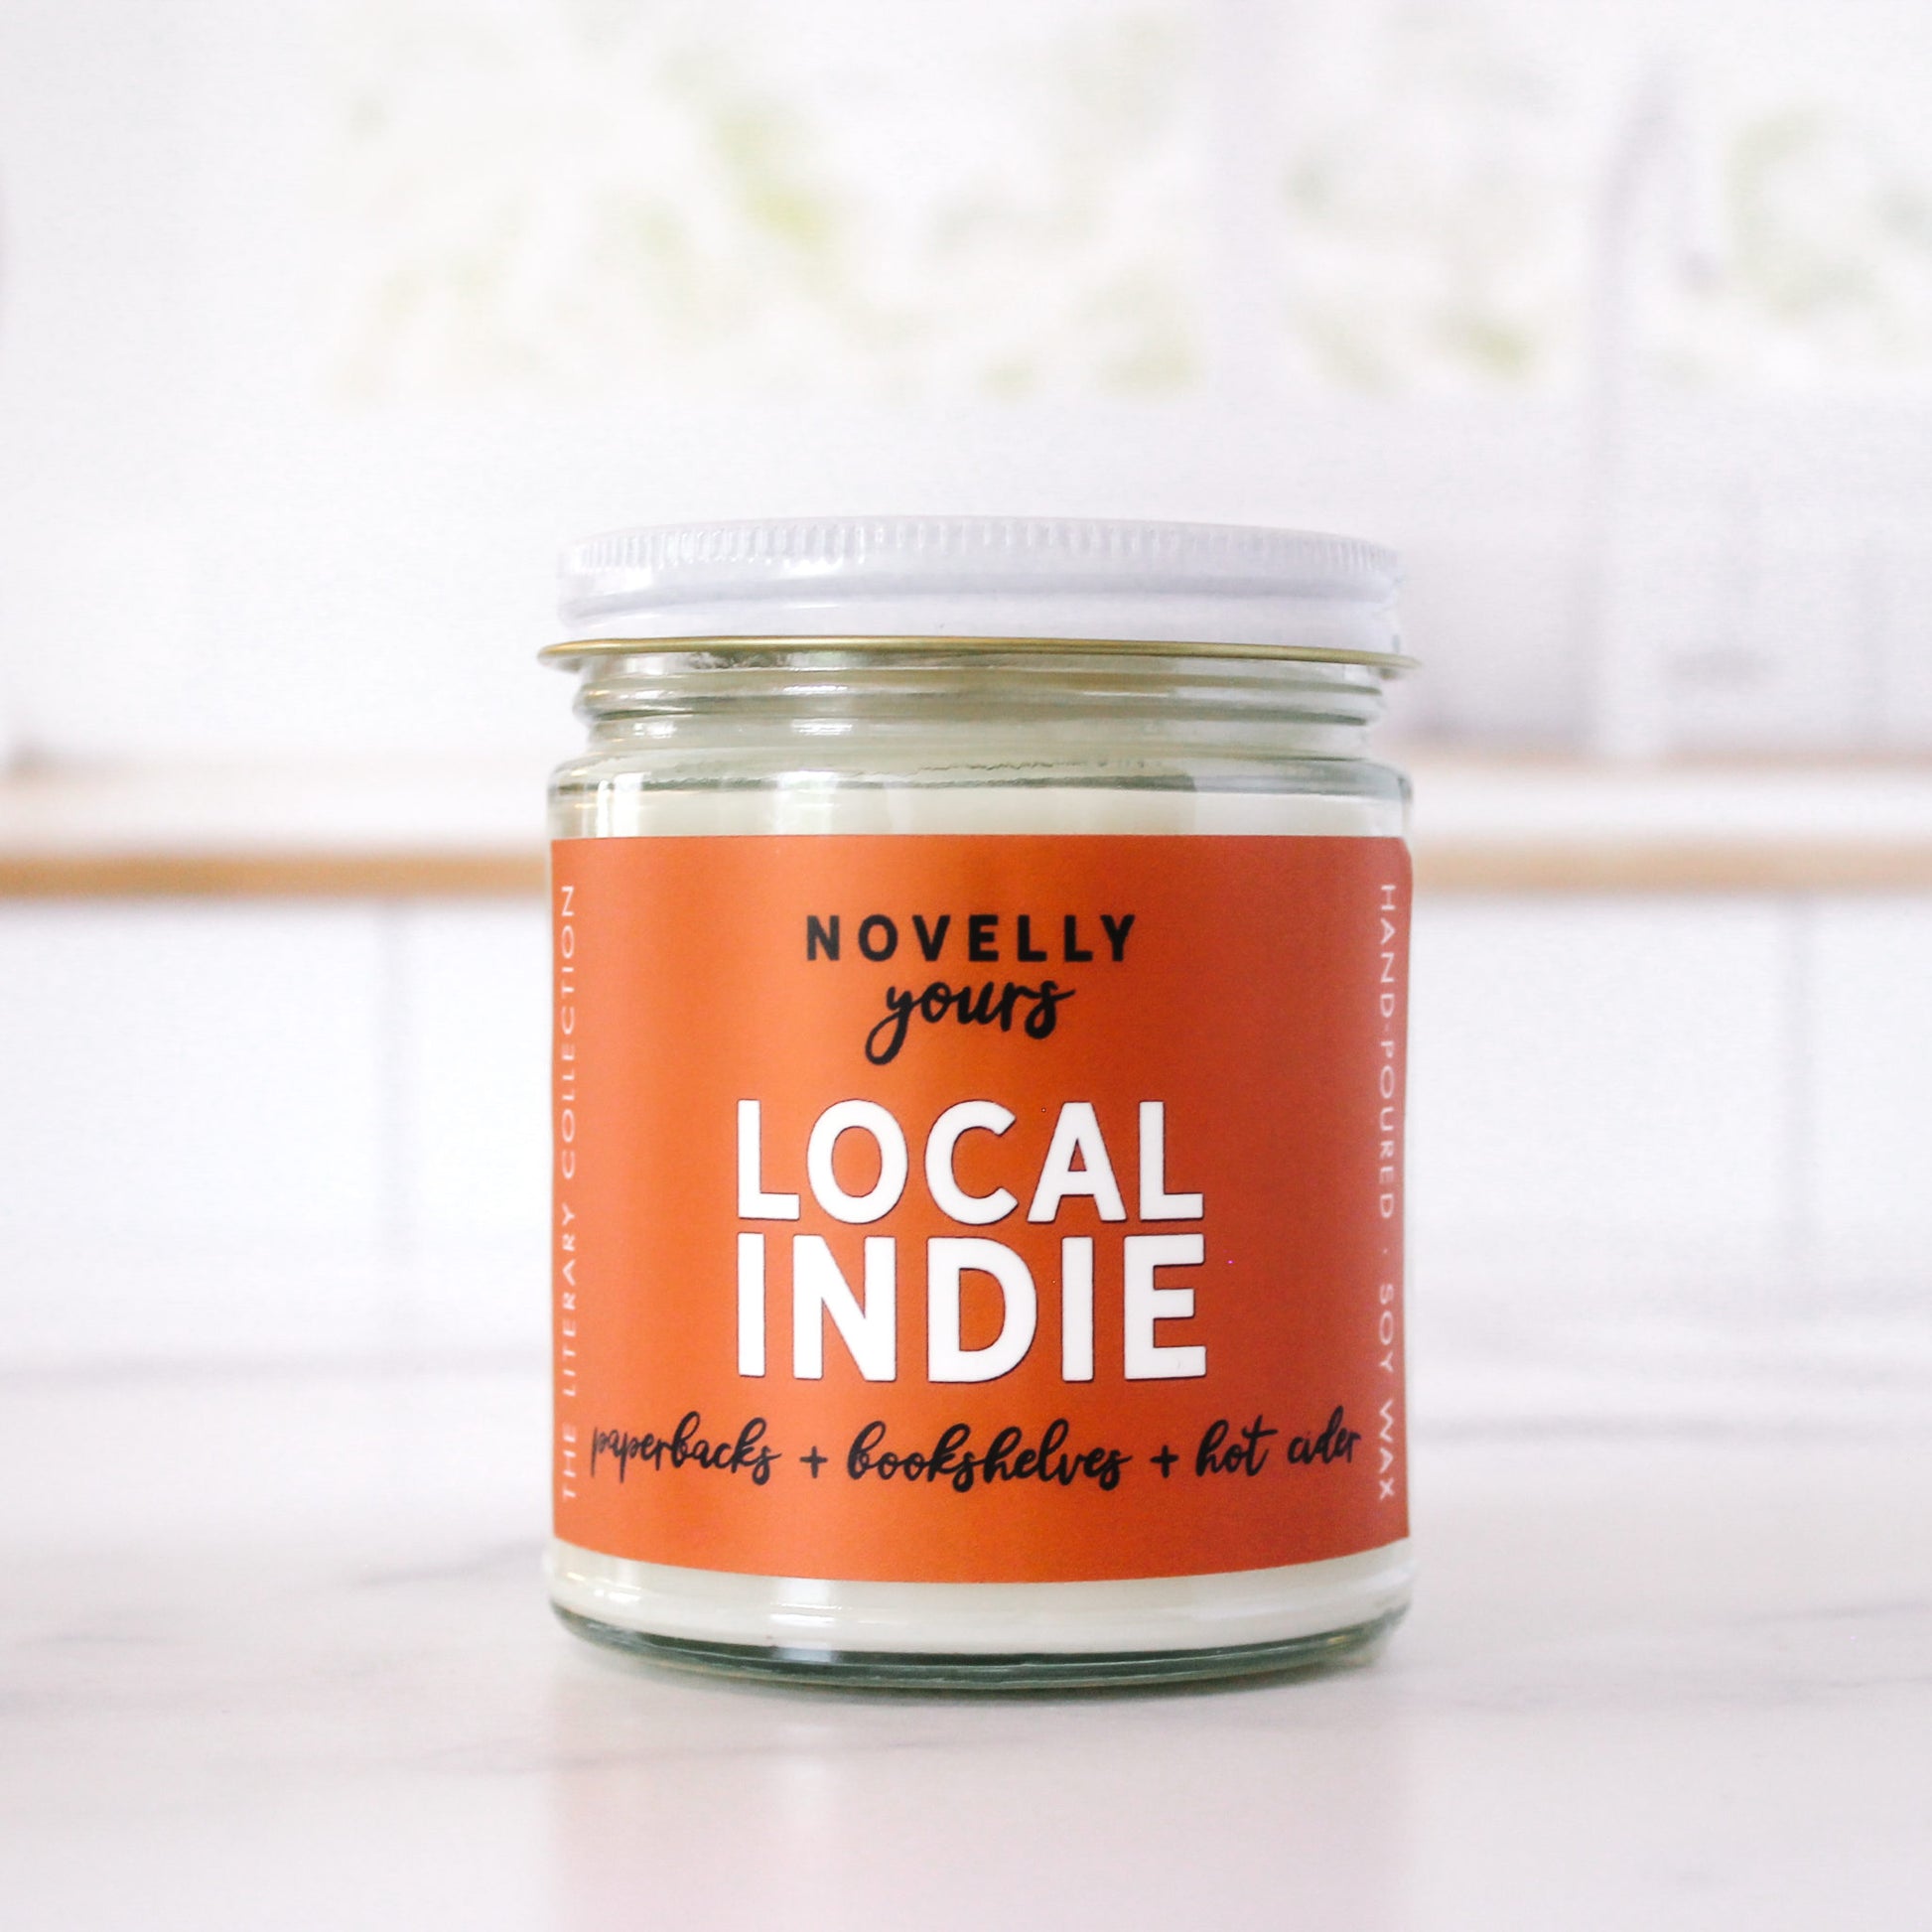 bookish candle "Local Indie" with orange label sits on marble kitchen counter top with clean kitchen in background